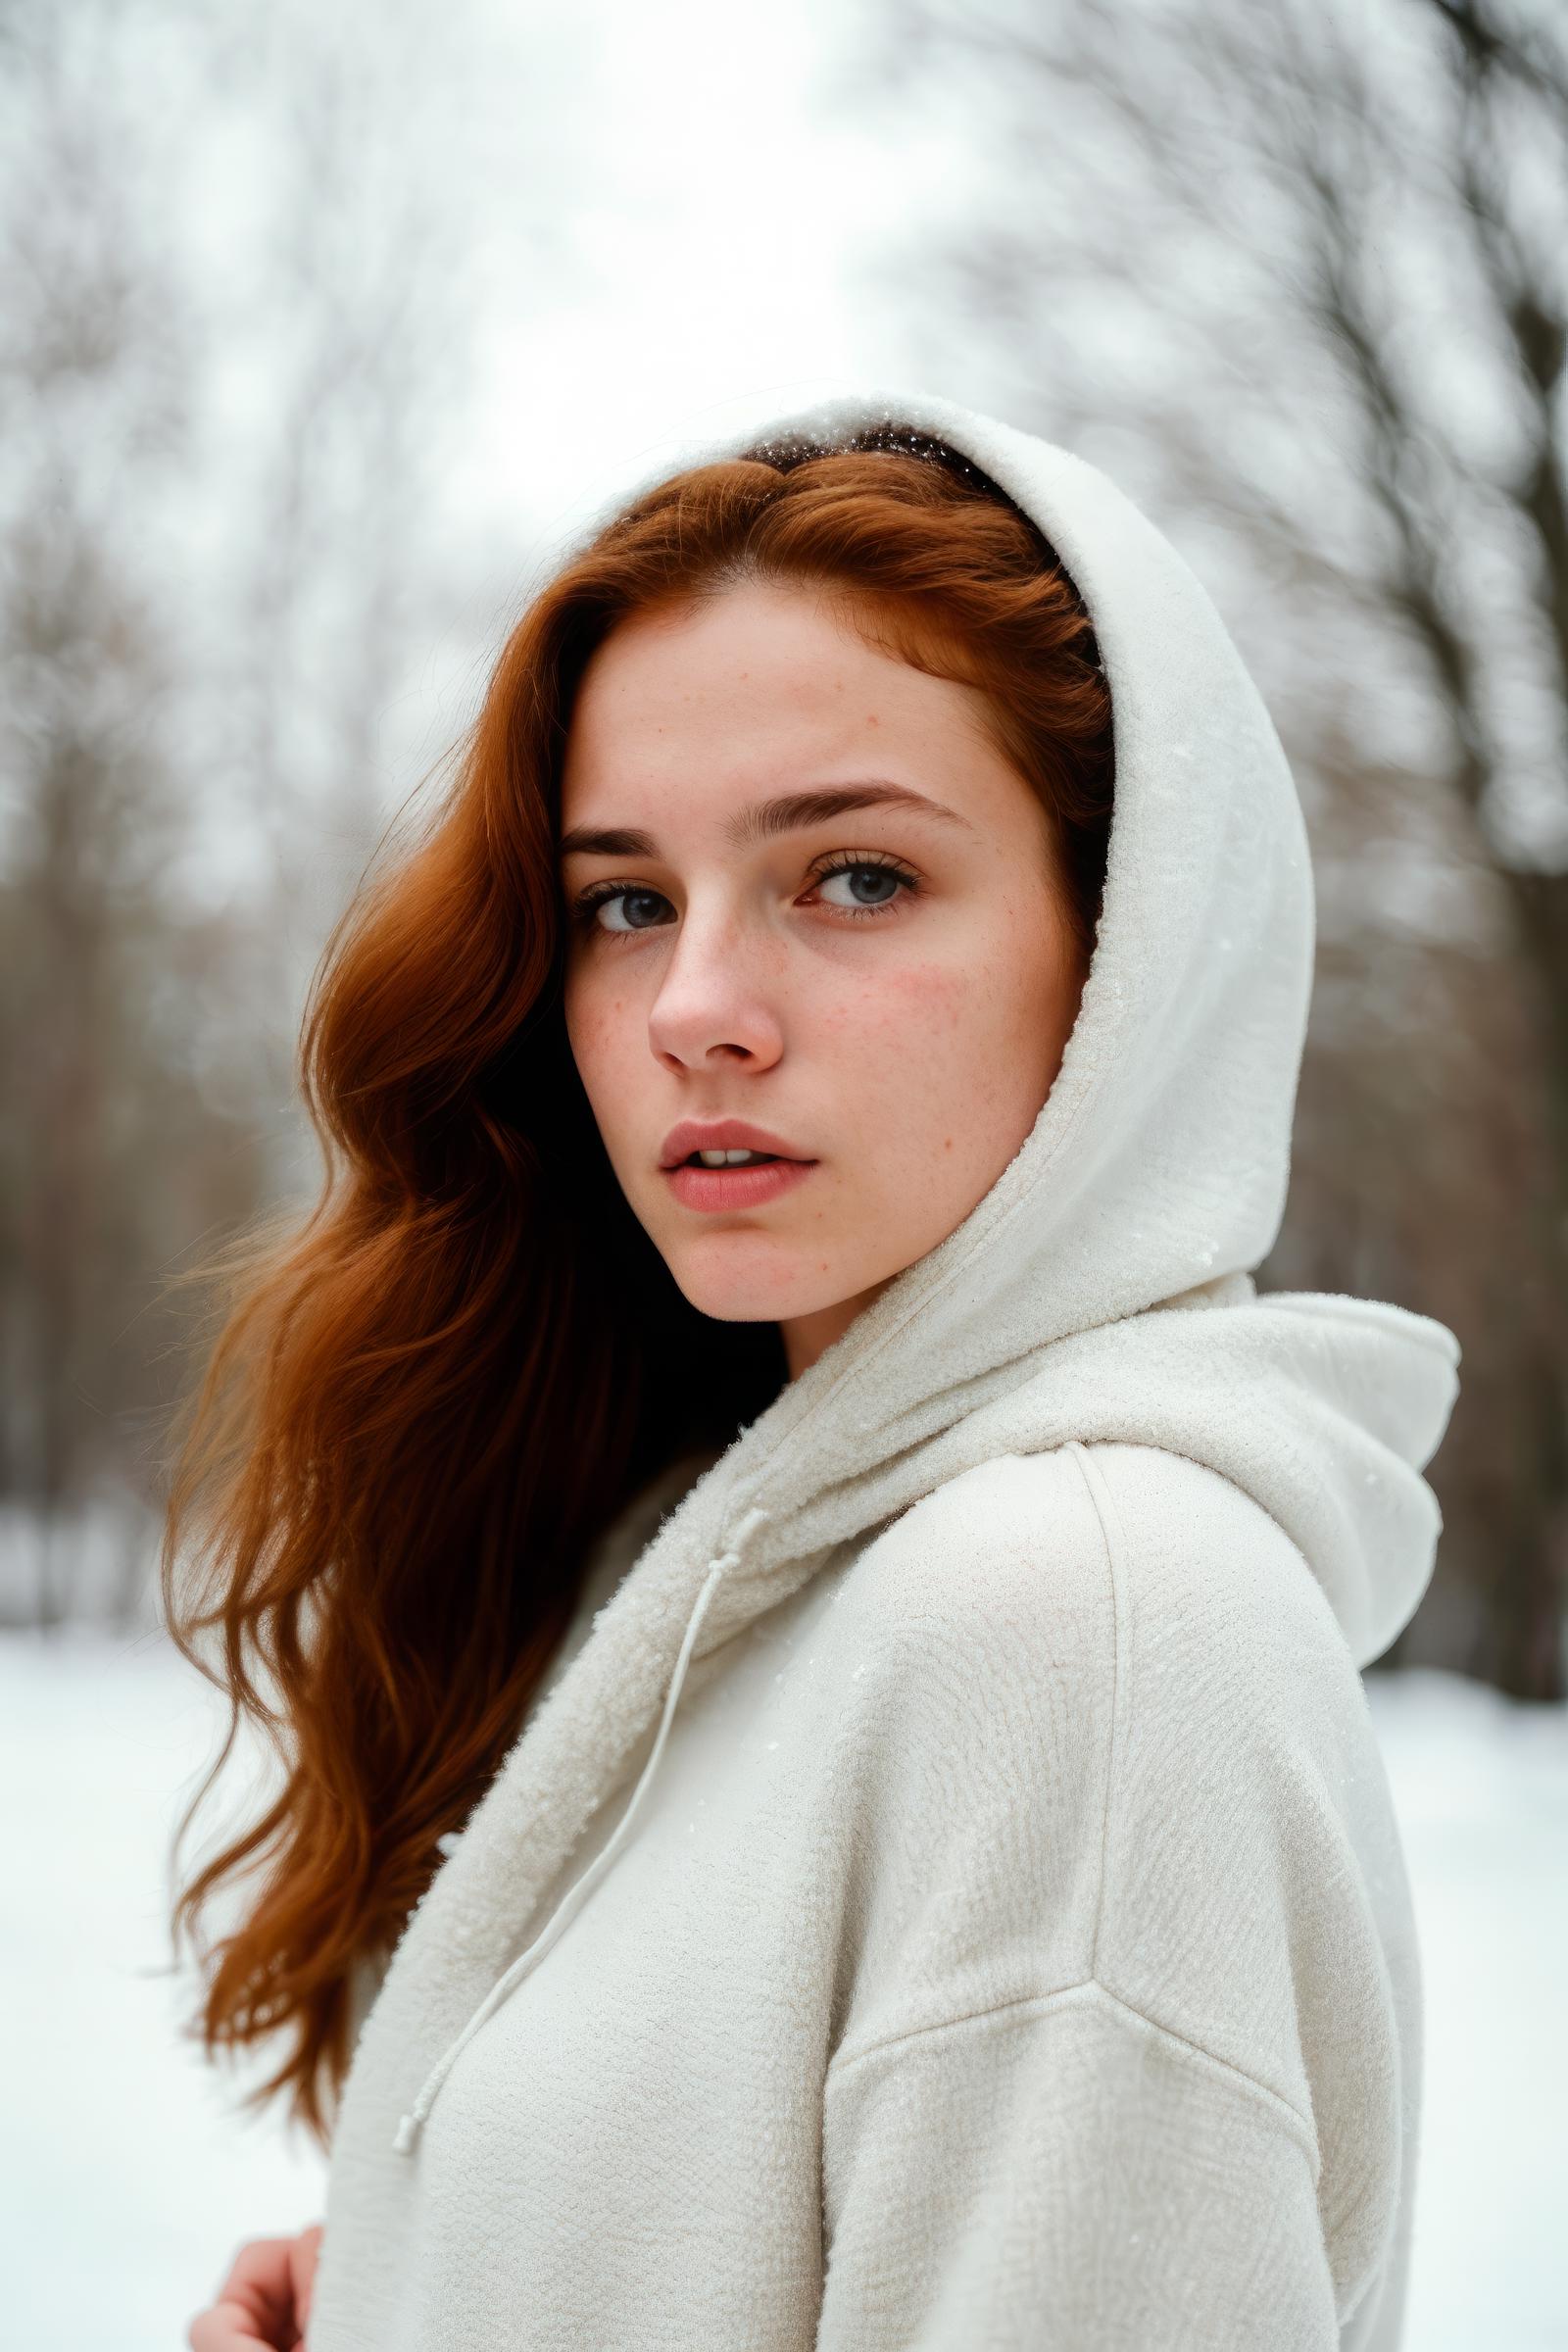 A Woman with Red Hair Wearing a White Sweatshirt, Looking to the Left.